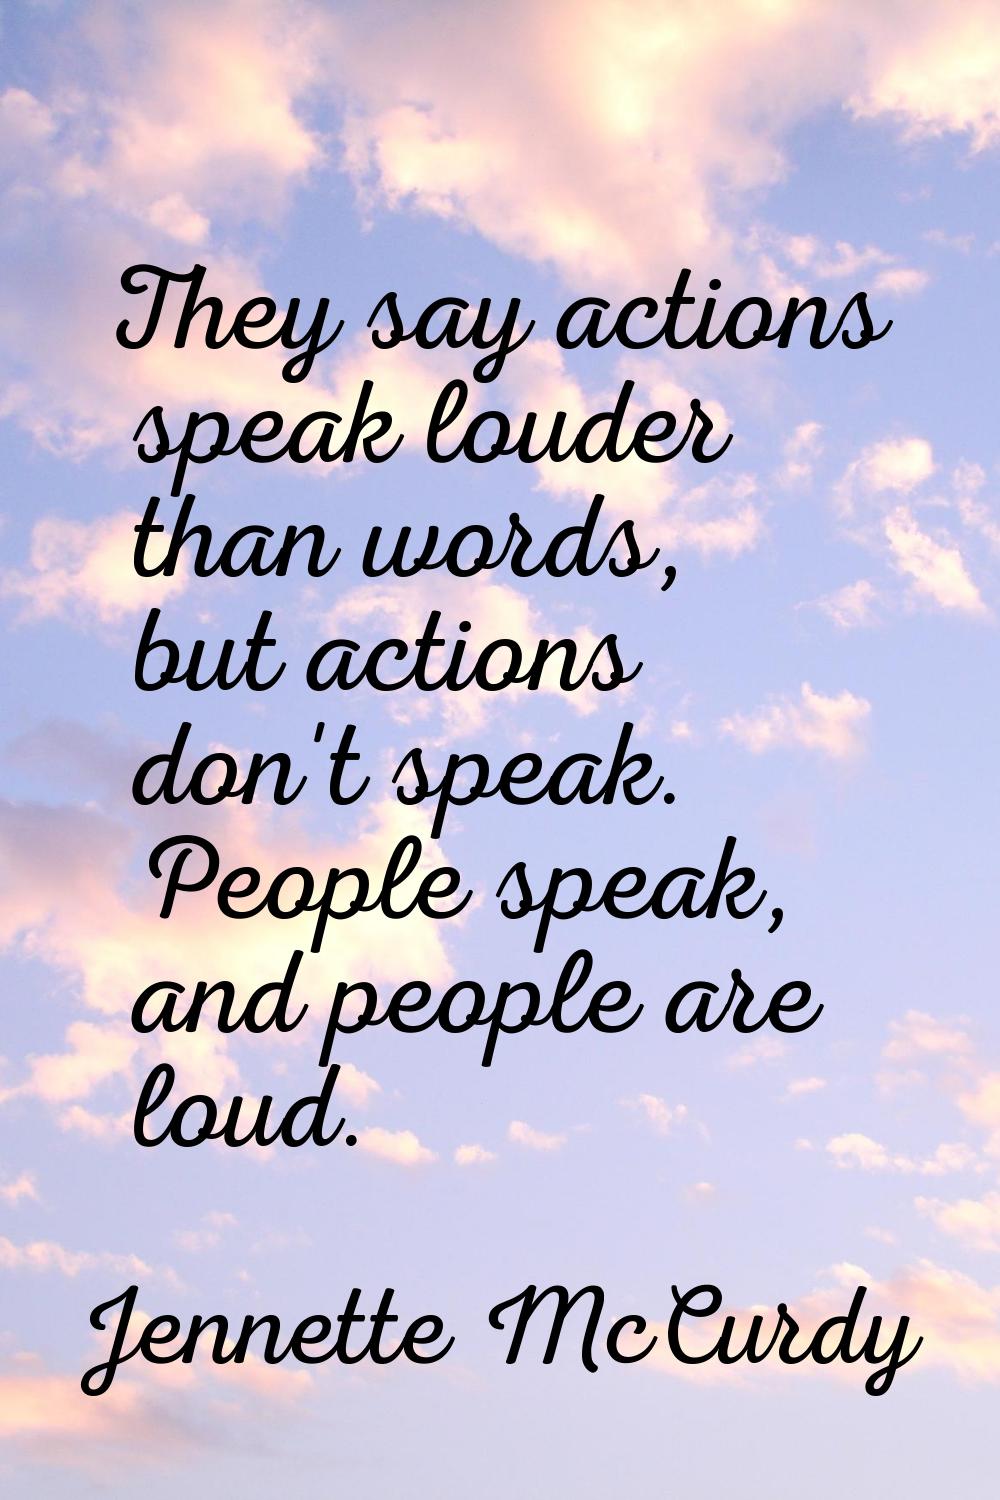 They say actions speak louder than words, but actions don't speak. People speak, and people are lou